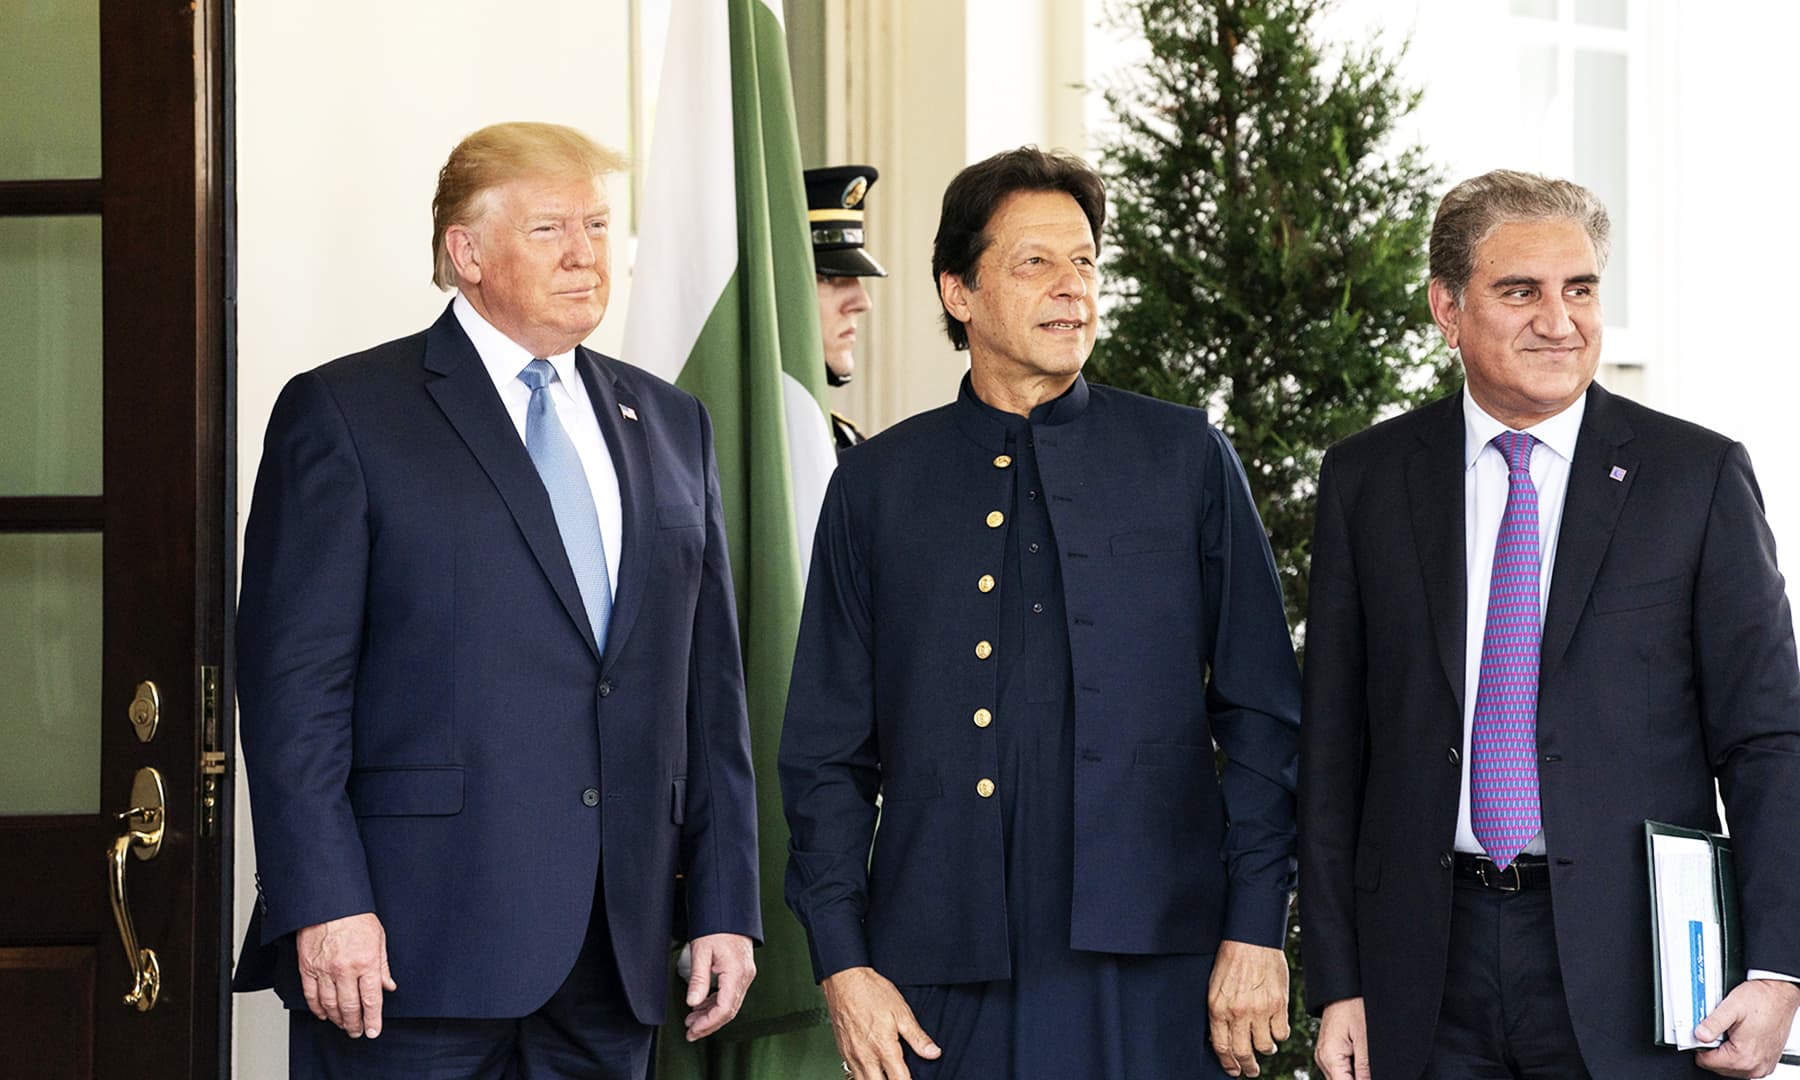 Foreign Minister Shah Mahmood Qureshi pictured with PM Khan and President Trump. —  White House Flickr